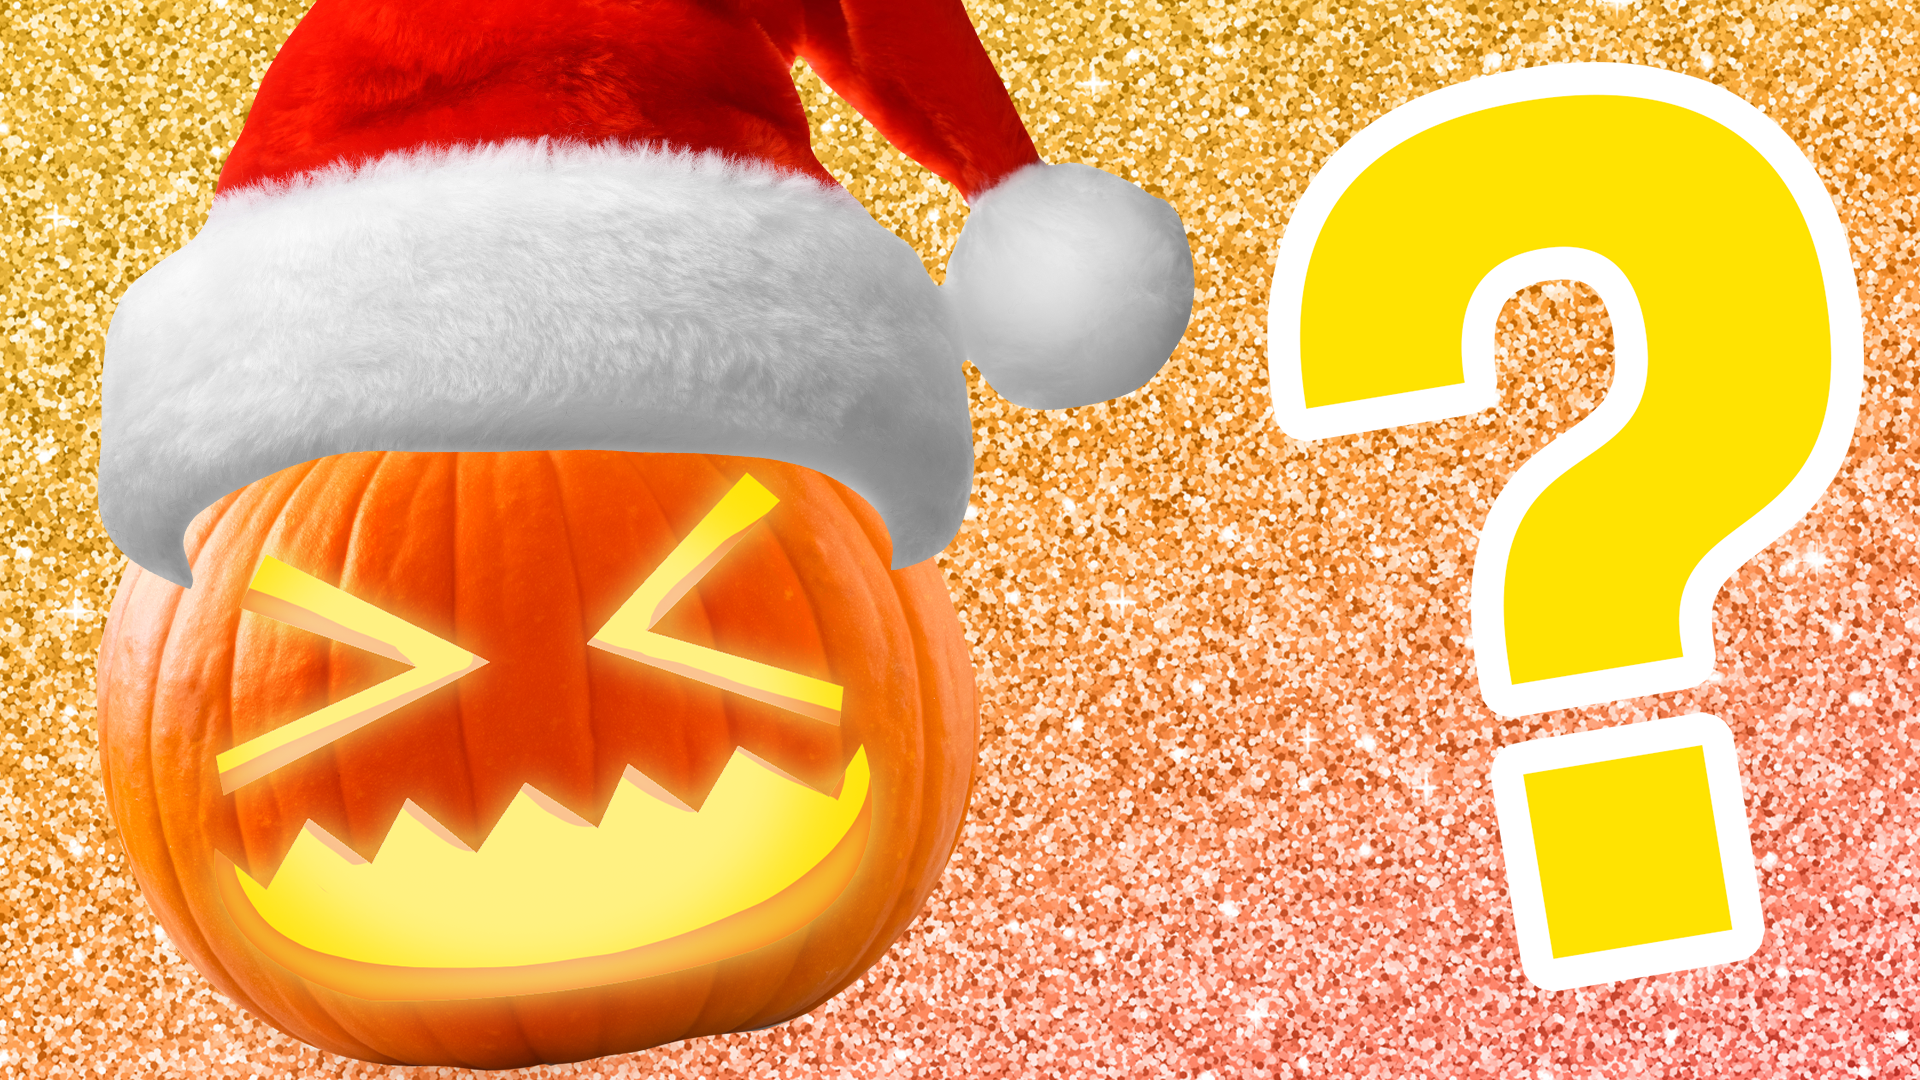 Pumpkin in Santa hat on glittery background with question mark